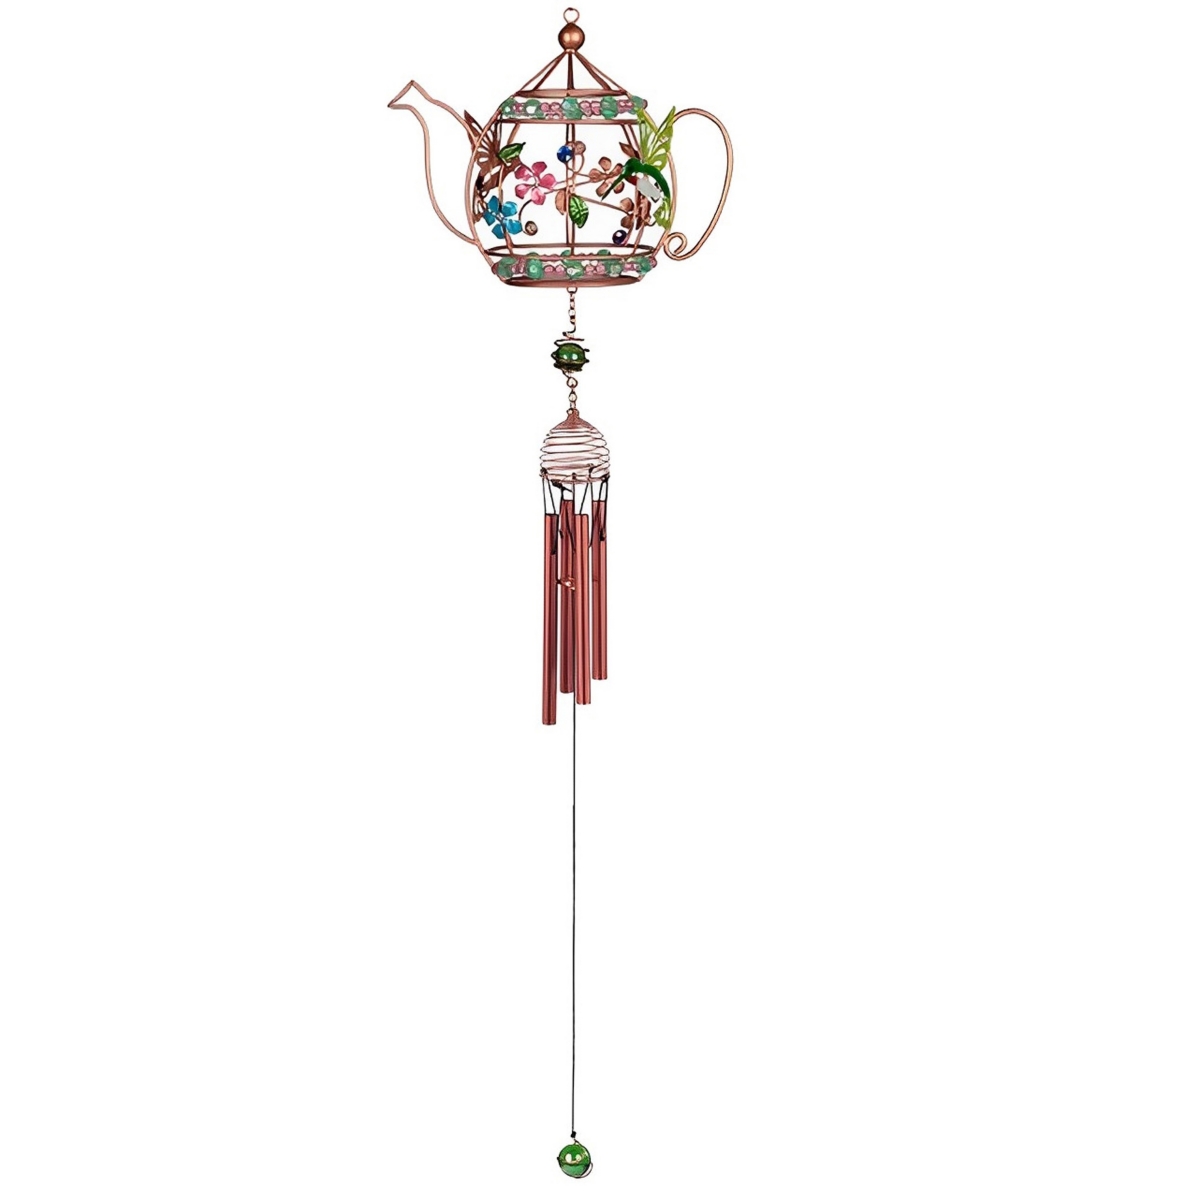 33" Long Hummingbird Copper and Gem Wind Chime in Teapot Shaped Home Decor Perfect Gift for House Warming, Holidays and Birthdays - Multi